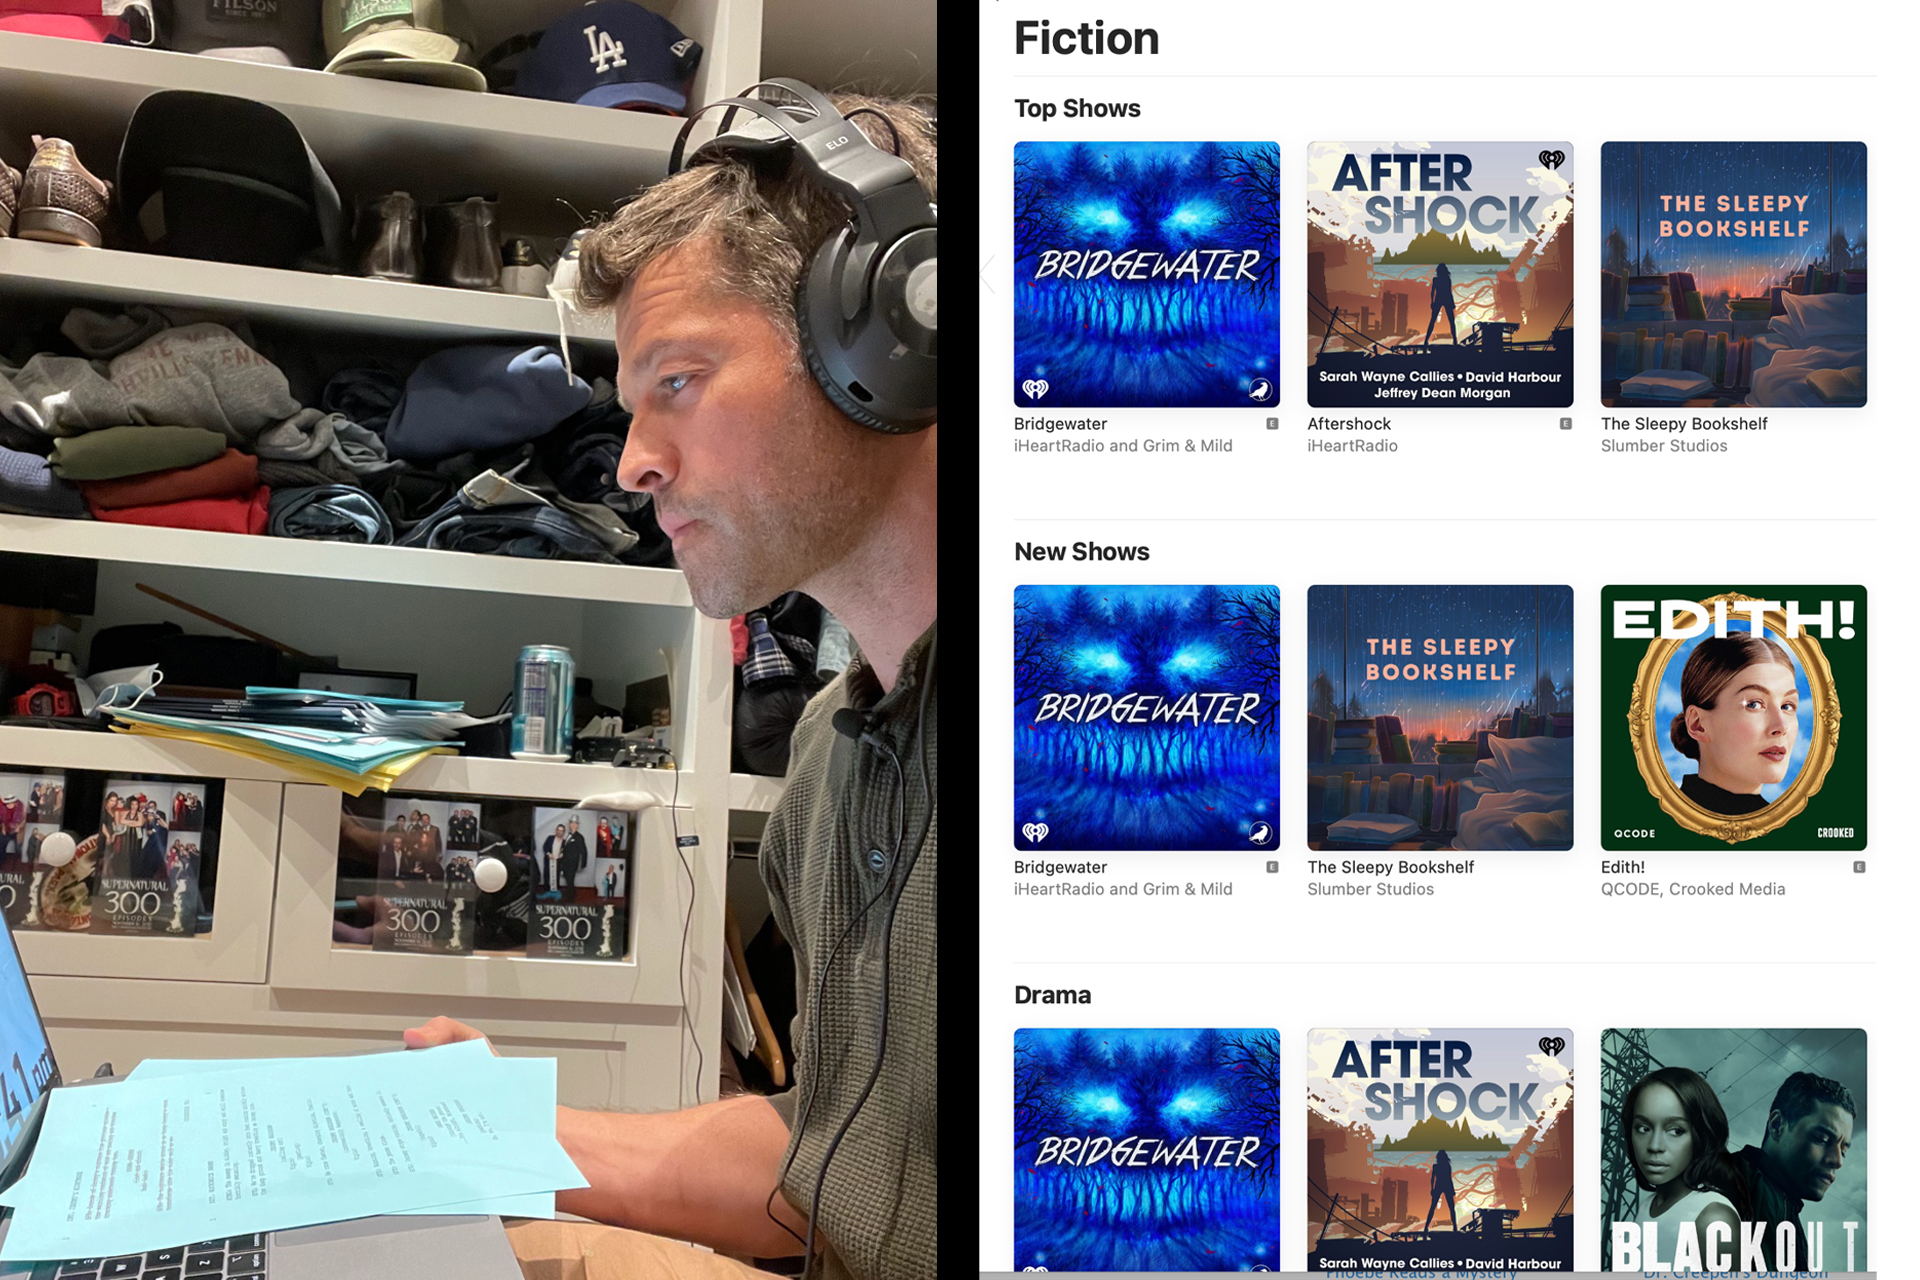 🦇 Misha Collins 🦇 on Twitter: "Even though I recorded in @dicksp8jr's closet, for the third week in a row @BridgewaterPod is #1 in fiction podcasts! Listen to it for free: